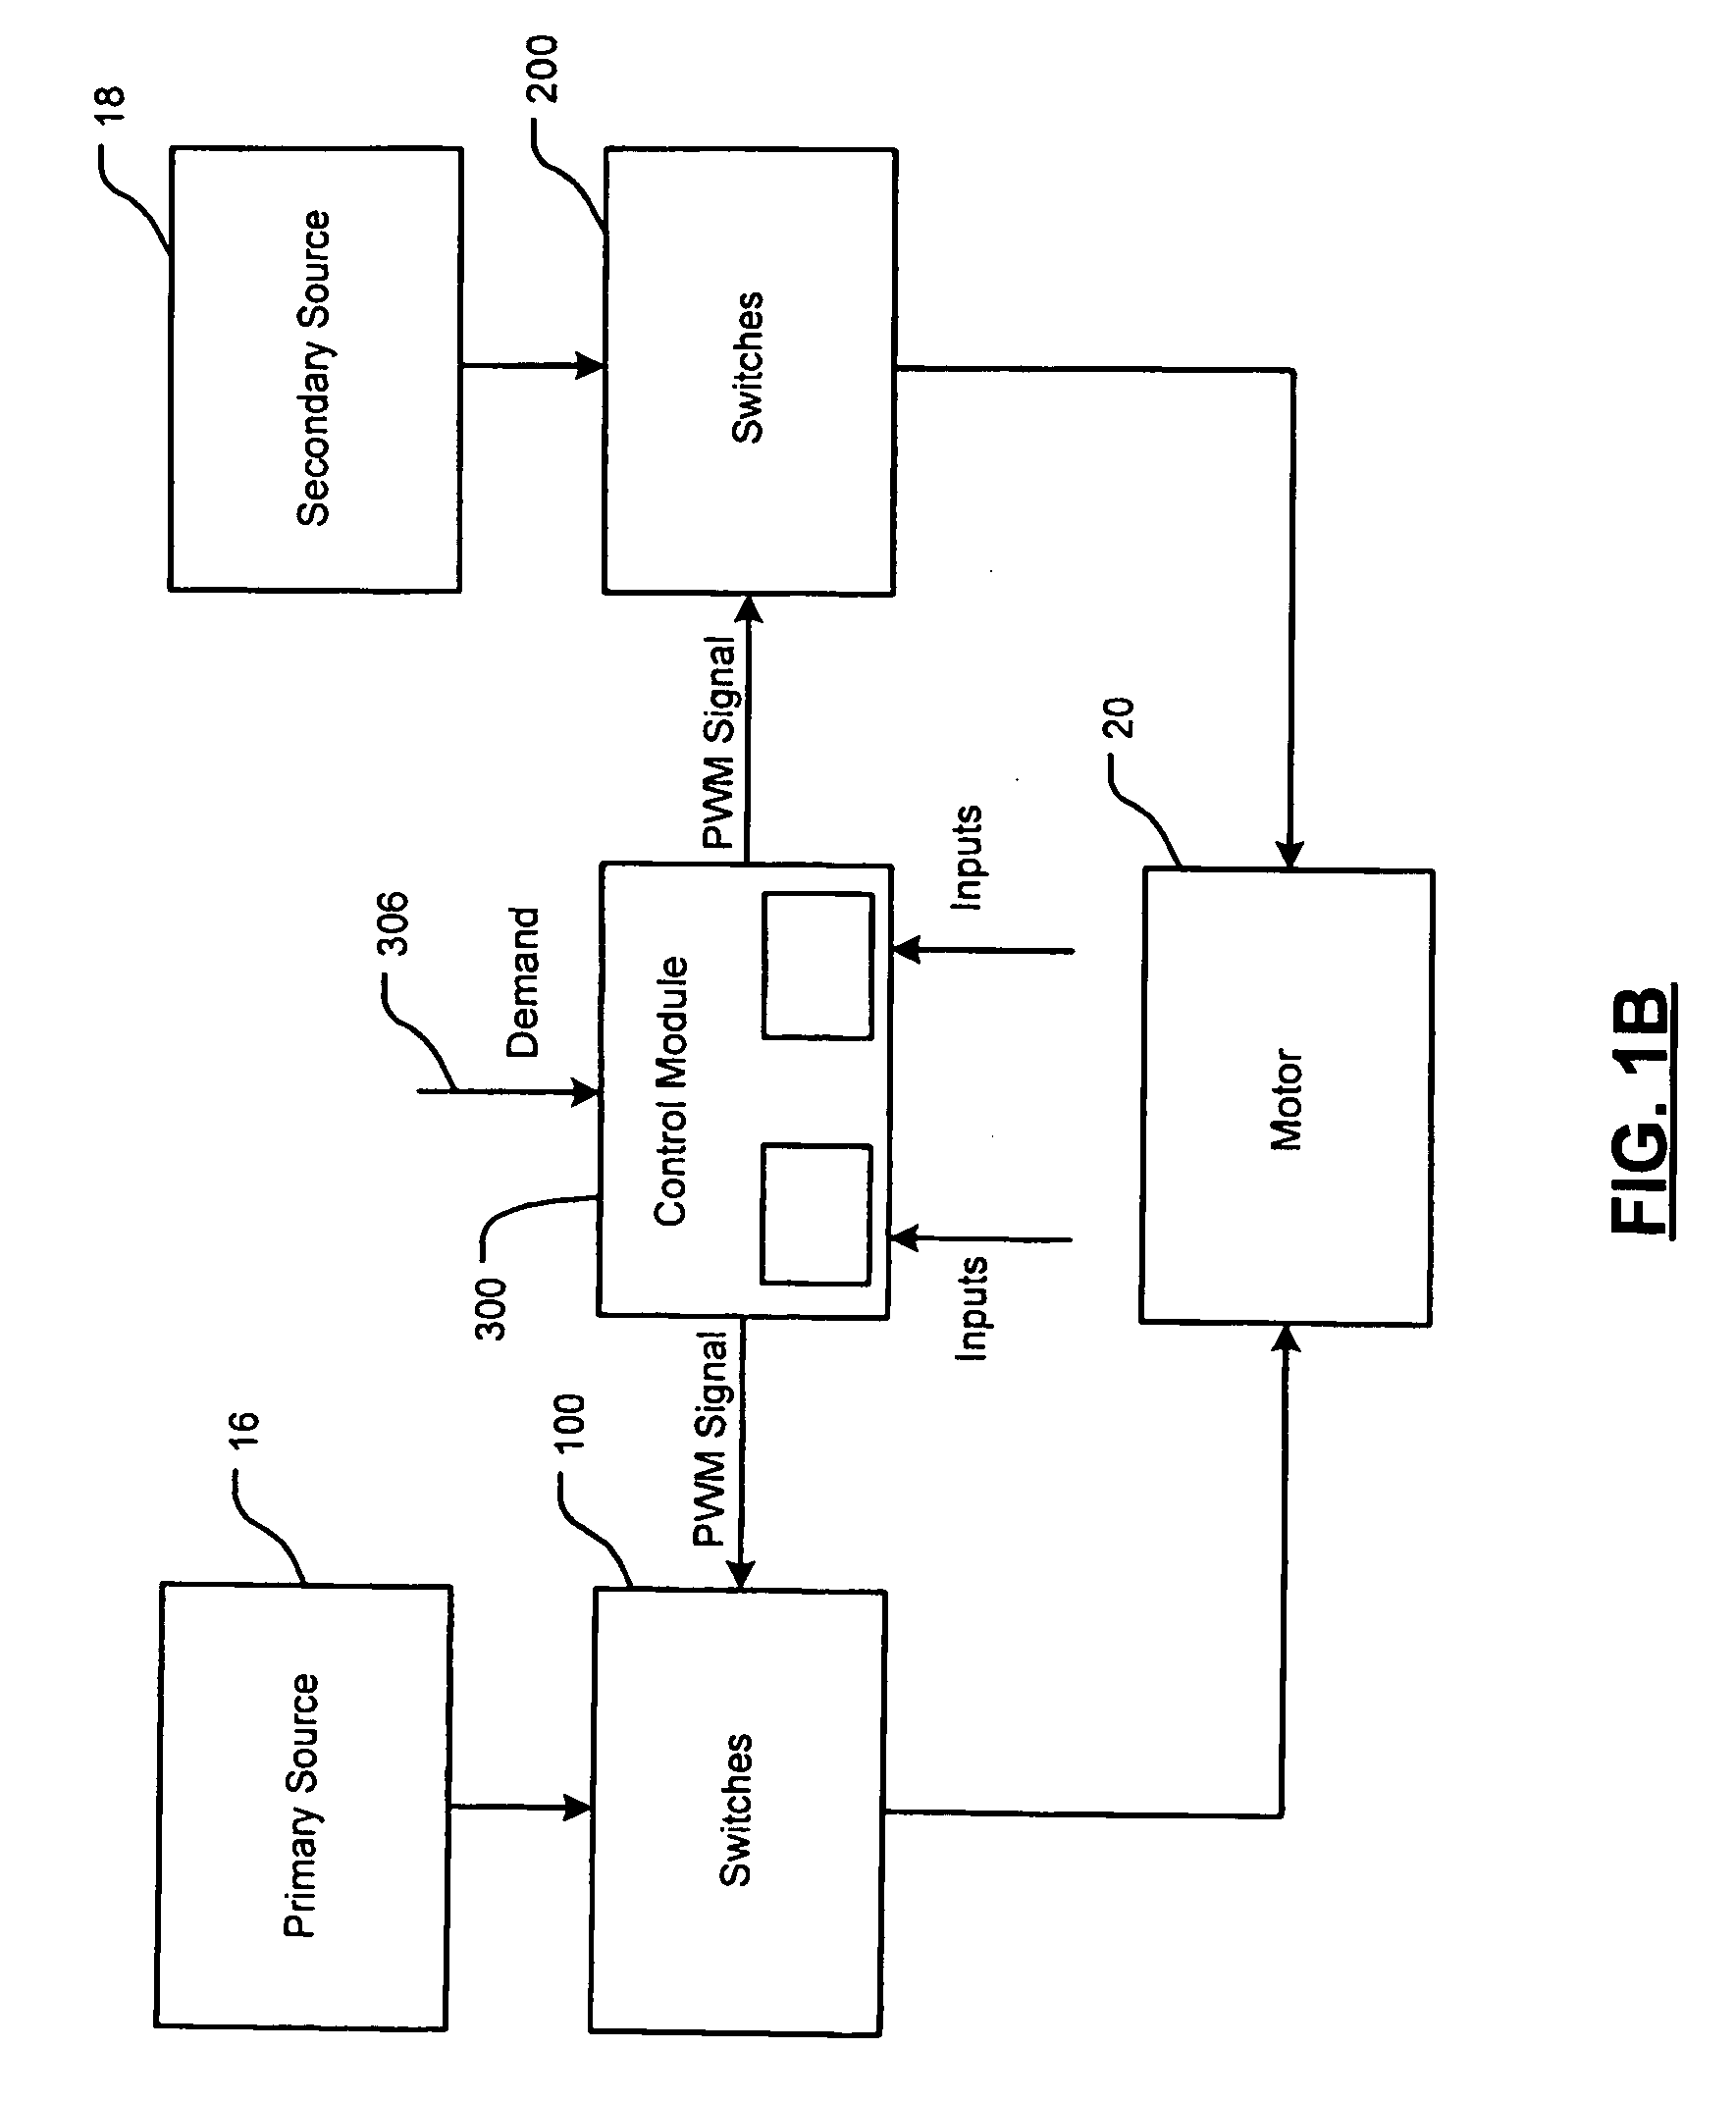 Double-ended inverter drive system topology for a hybrid vehicle